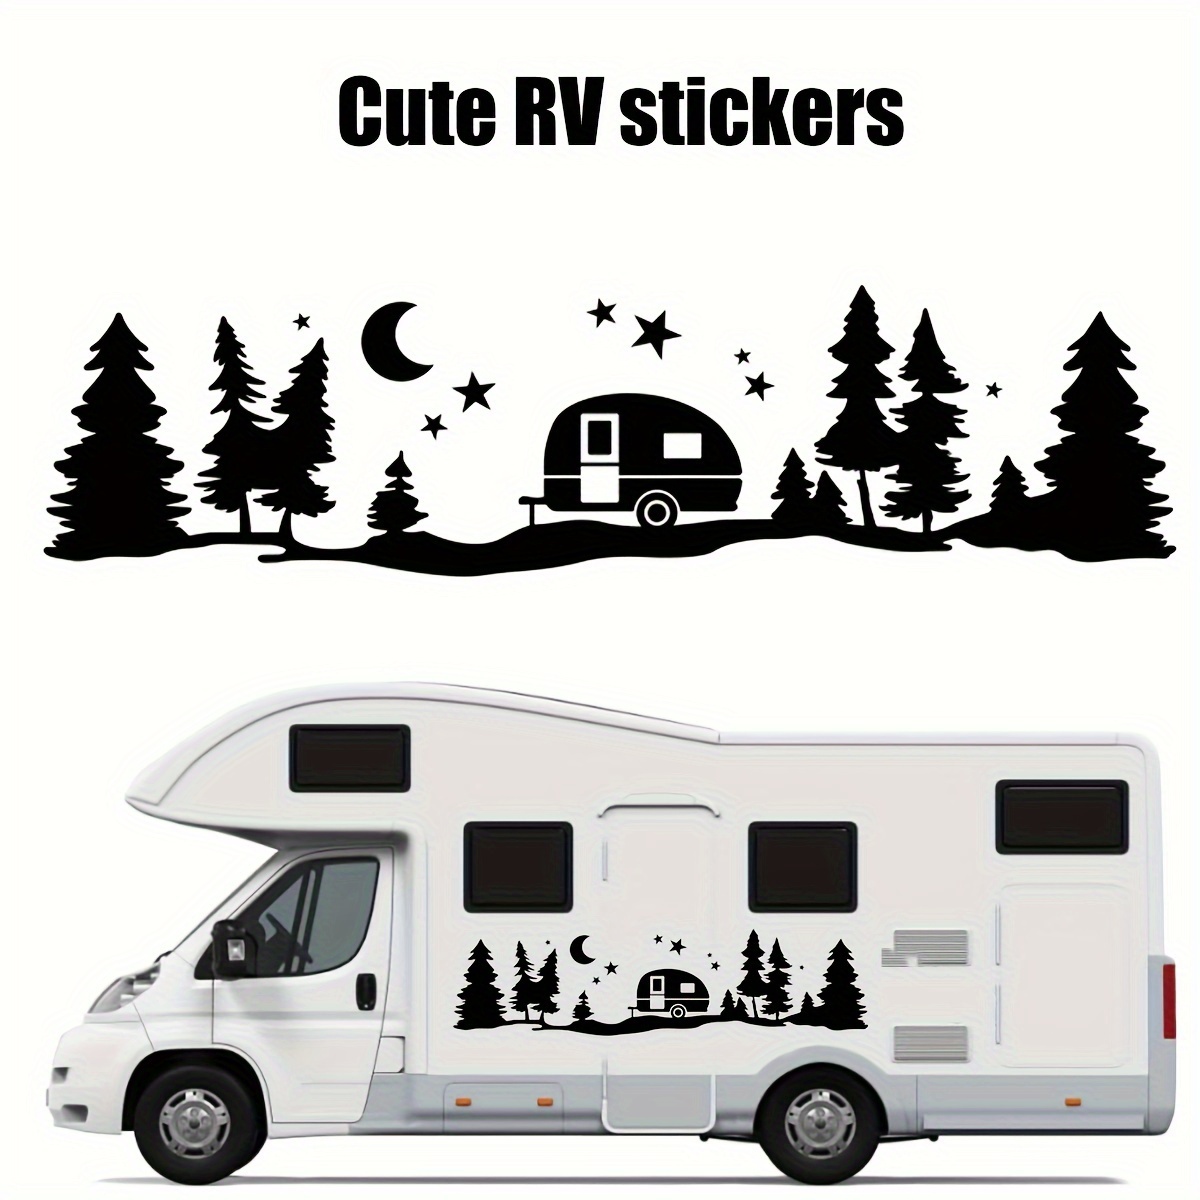 

Car Stickers And Decals Car Side Body Stickers Mountain Tree Forest Graphic Decals Car Sticker Mountain Decal Tree Forest Vinyl Graphic Kit For Camper Rv Trailer